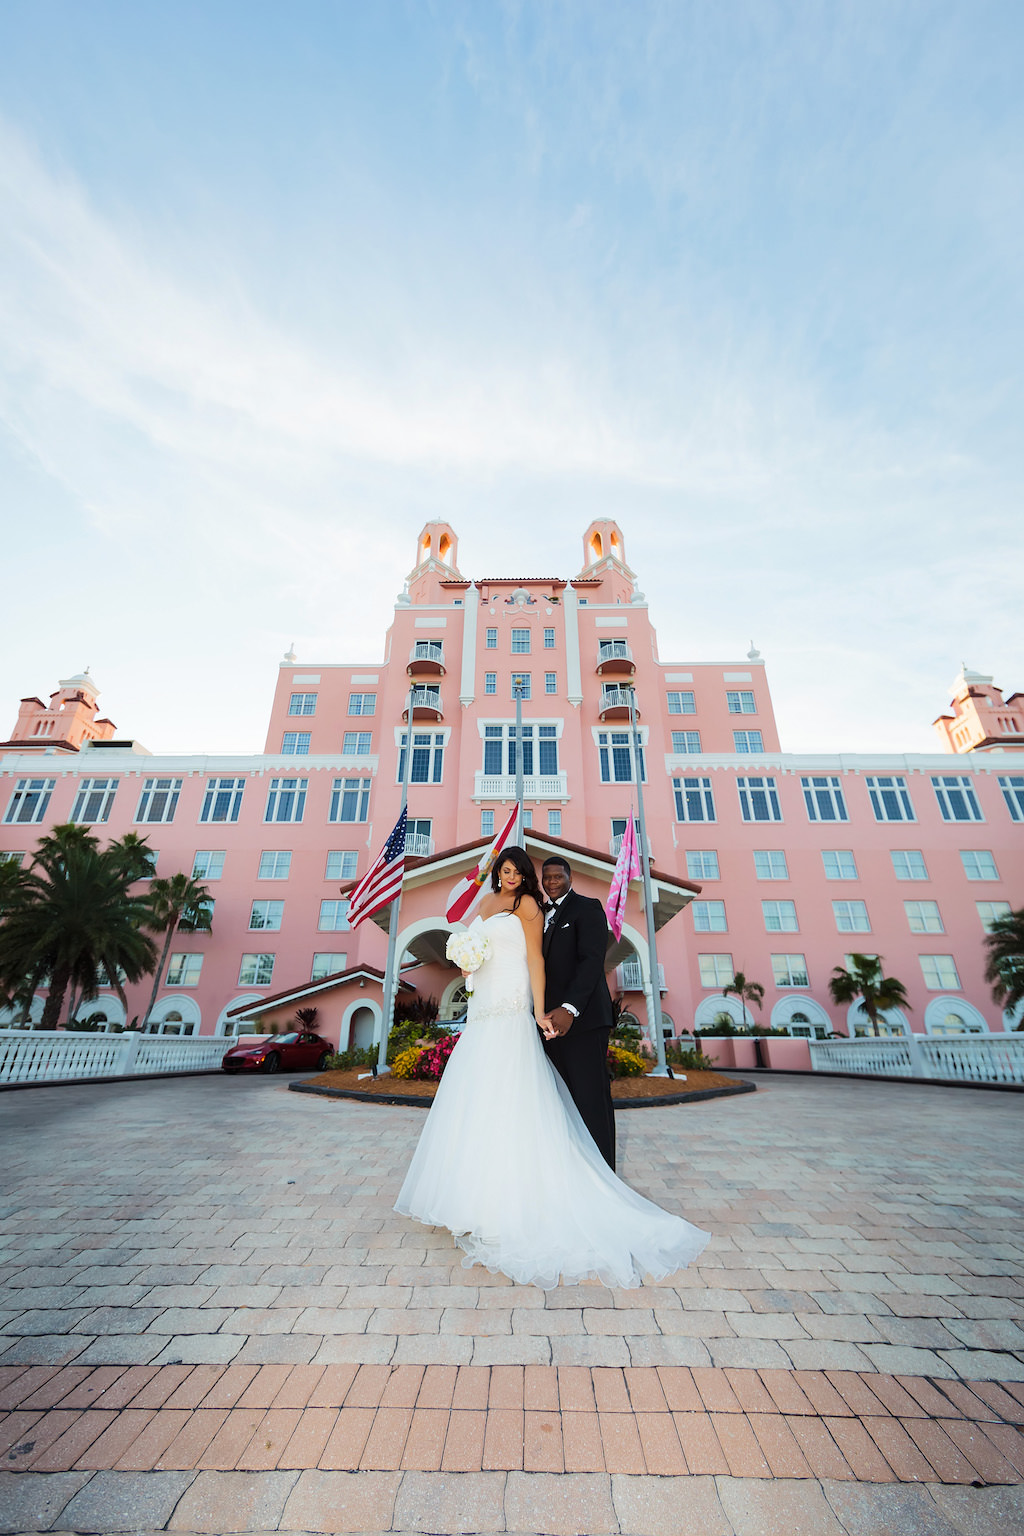 Tampa Bay Bride and Groom Portrait | The Pink Palace, Historic Beachfront Florida Wedding Venue The Don CeSar in St. Pete Beach